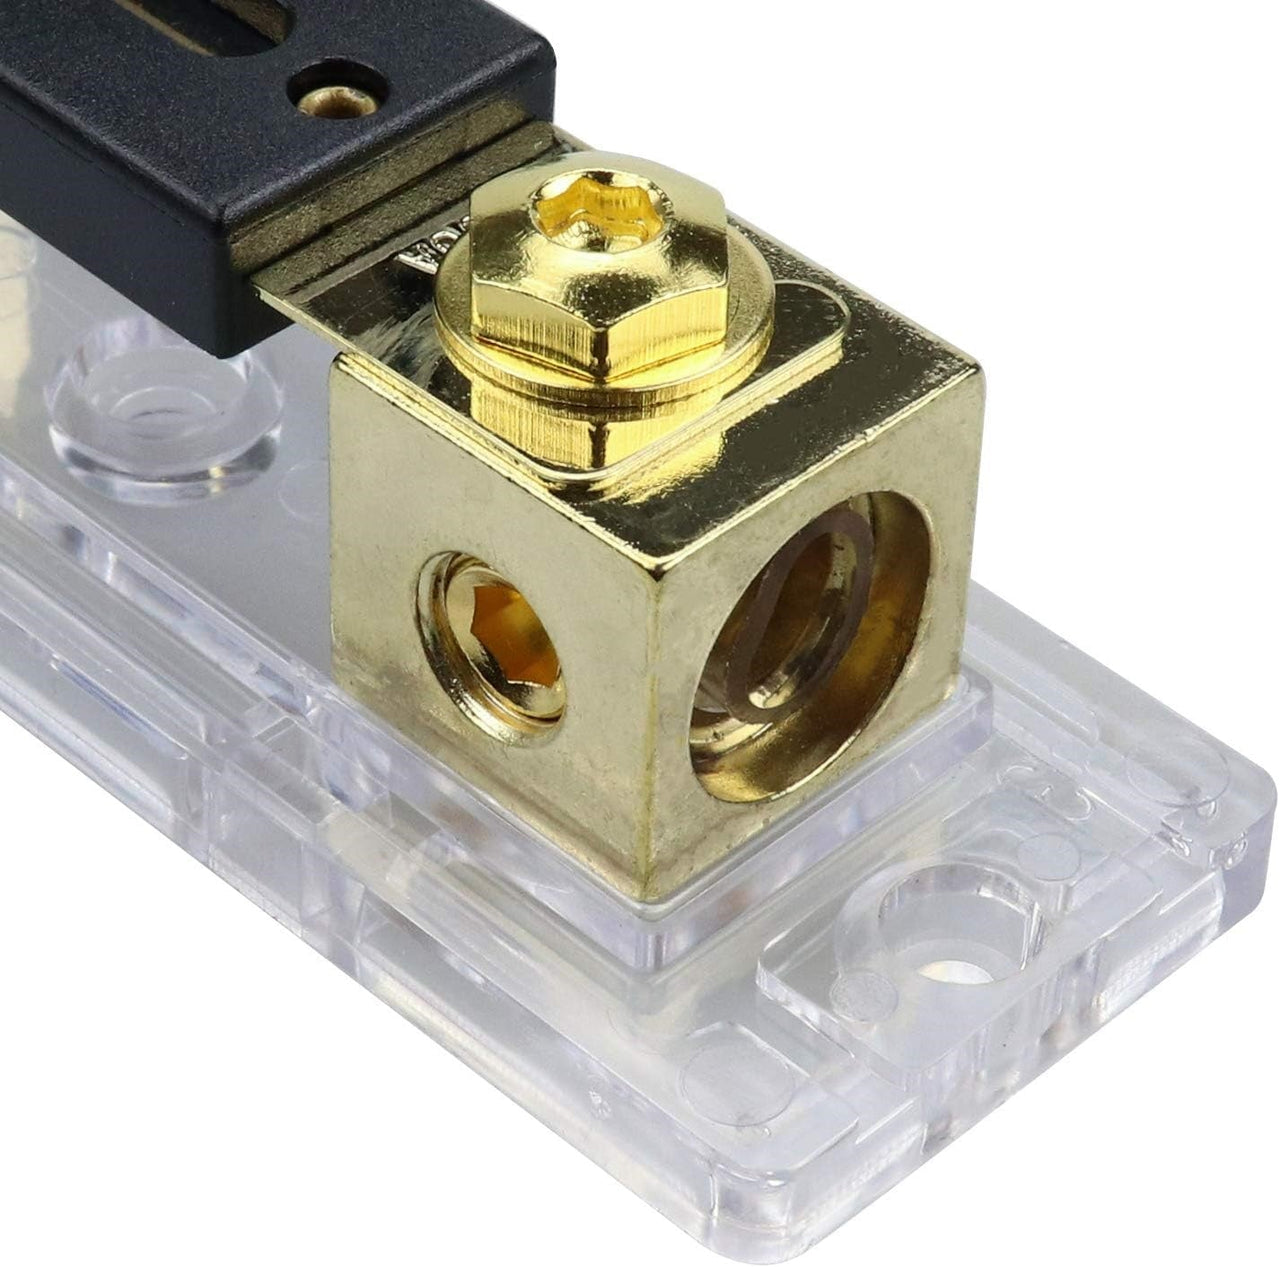 2 Absolute ANH-3 0/2/4 Gauge AWG in-Line ANL Fuse Holder & 2 Gold Plated 200 Amp Fuse